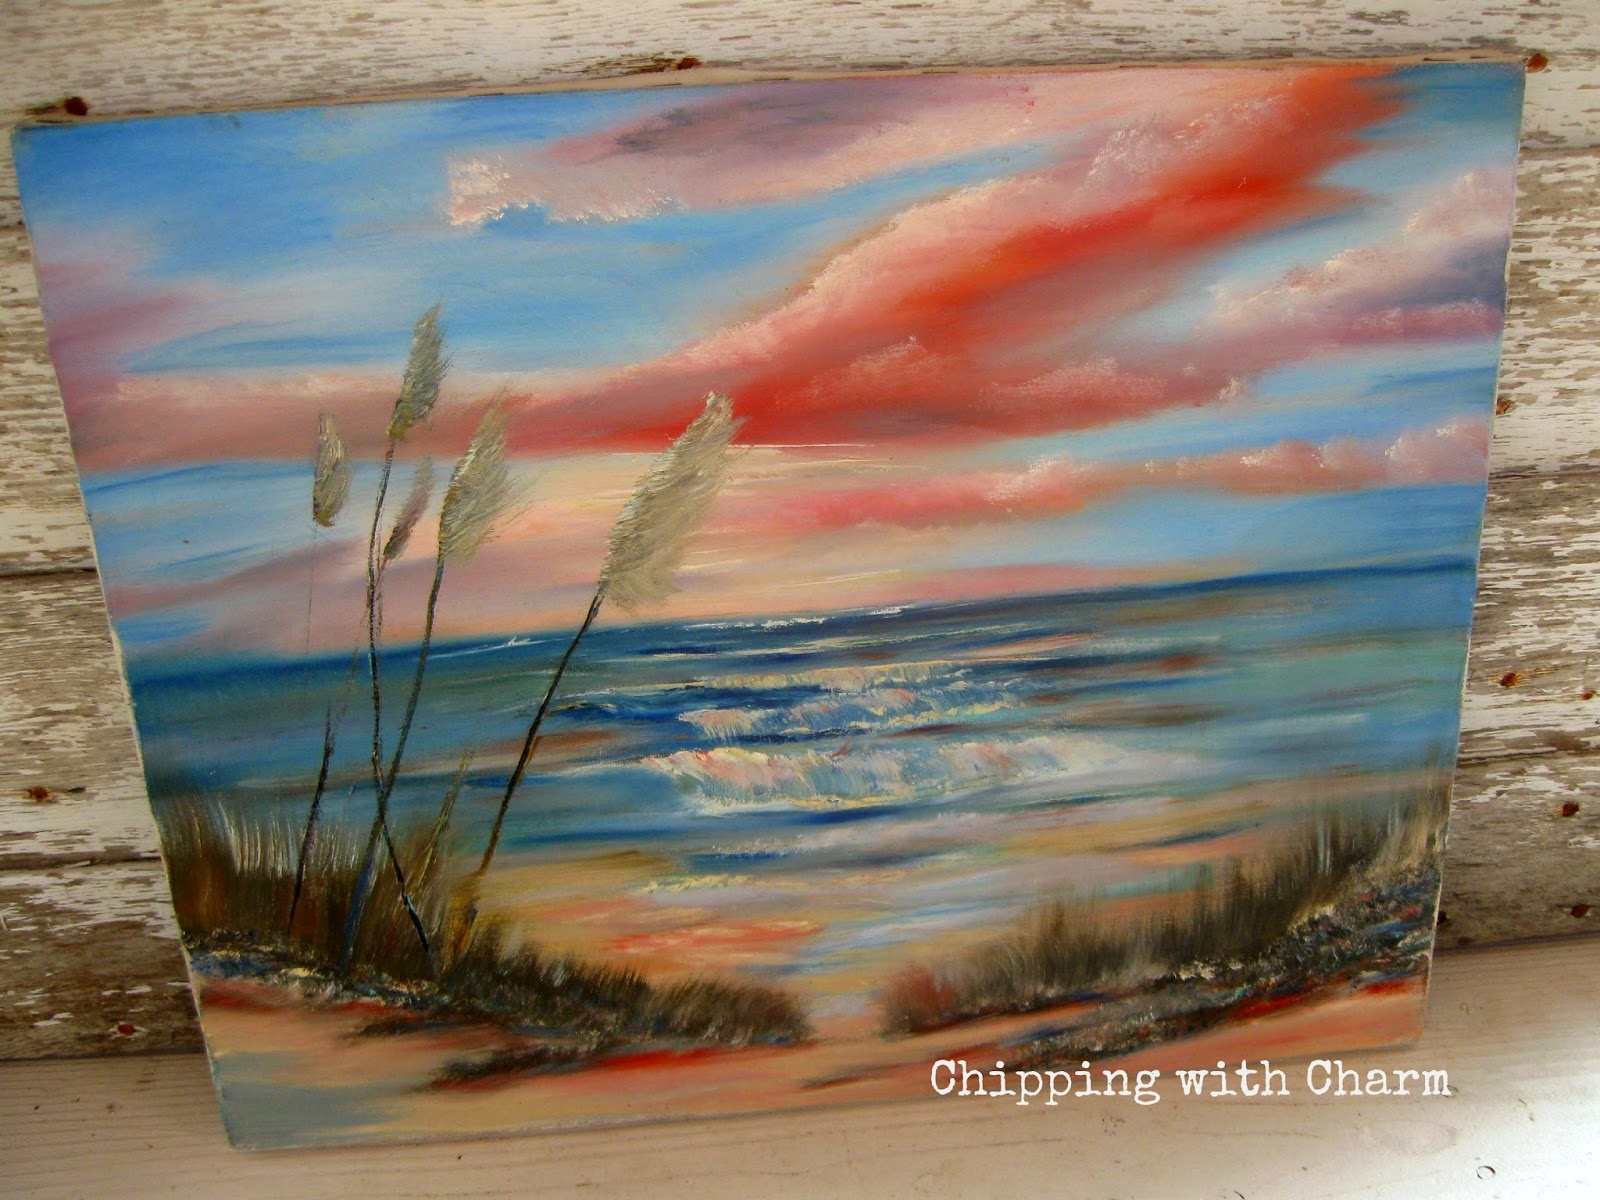 Chipping with Charm: Embellished Thrift Store Art...www.chipping withcharm.blogspot.com